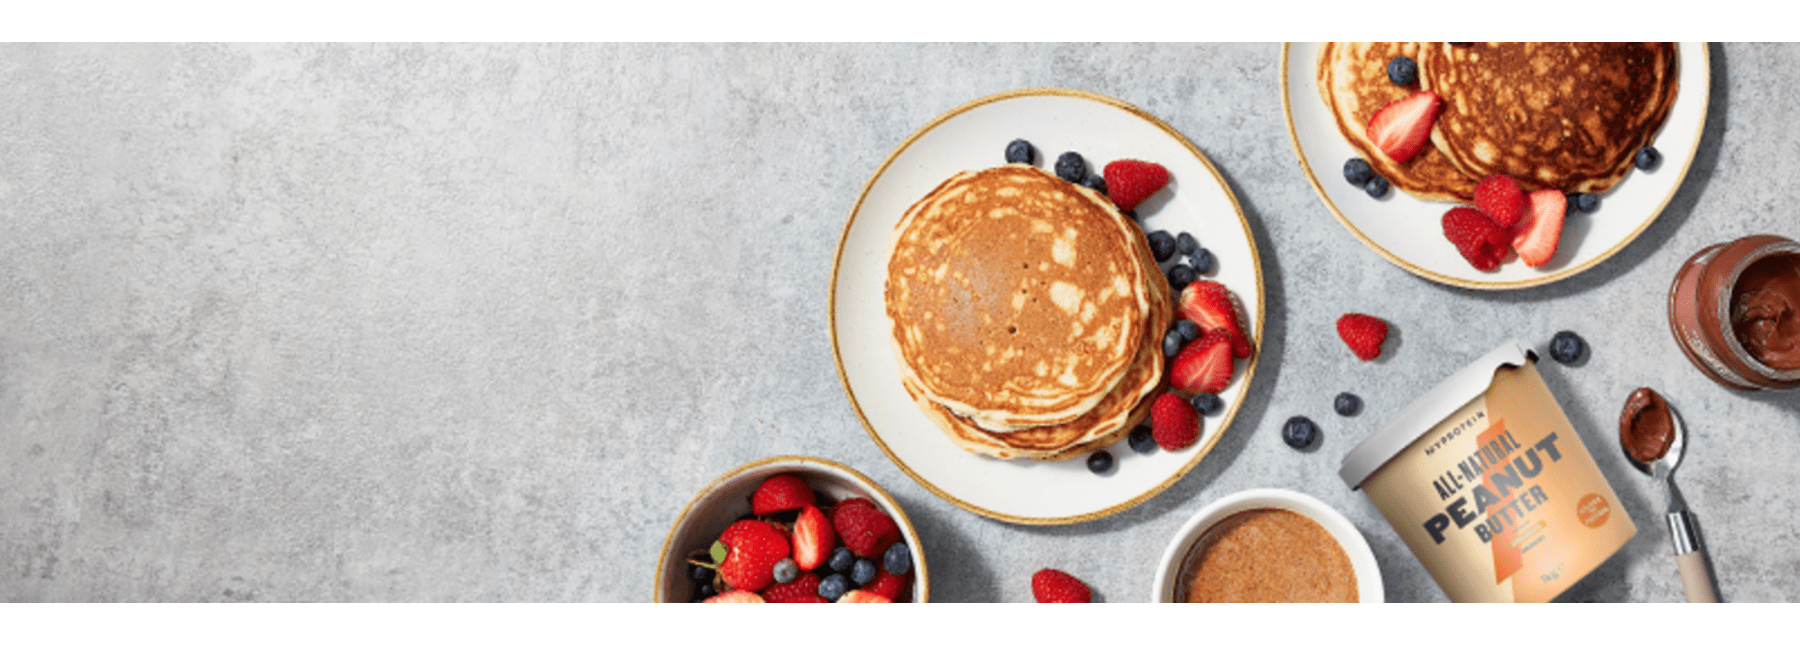 Build a Better Breakfast | Introducing Protein Pancake Mix